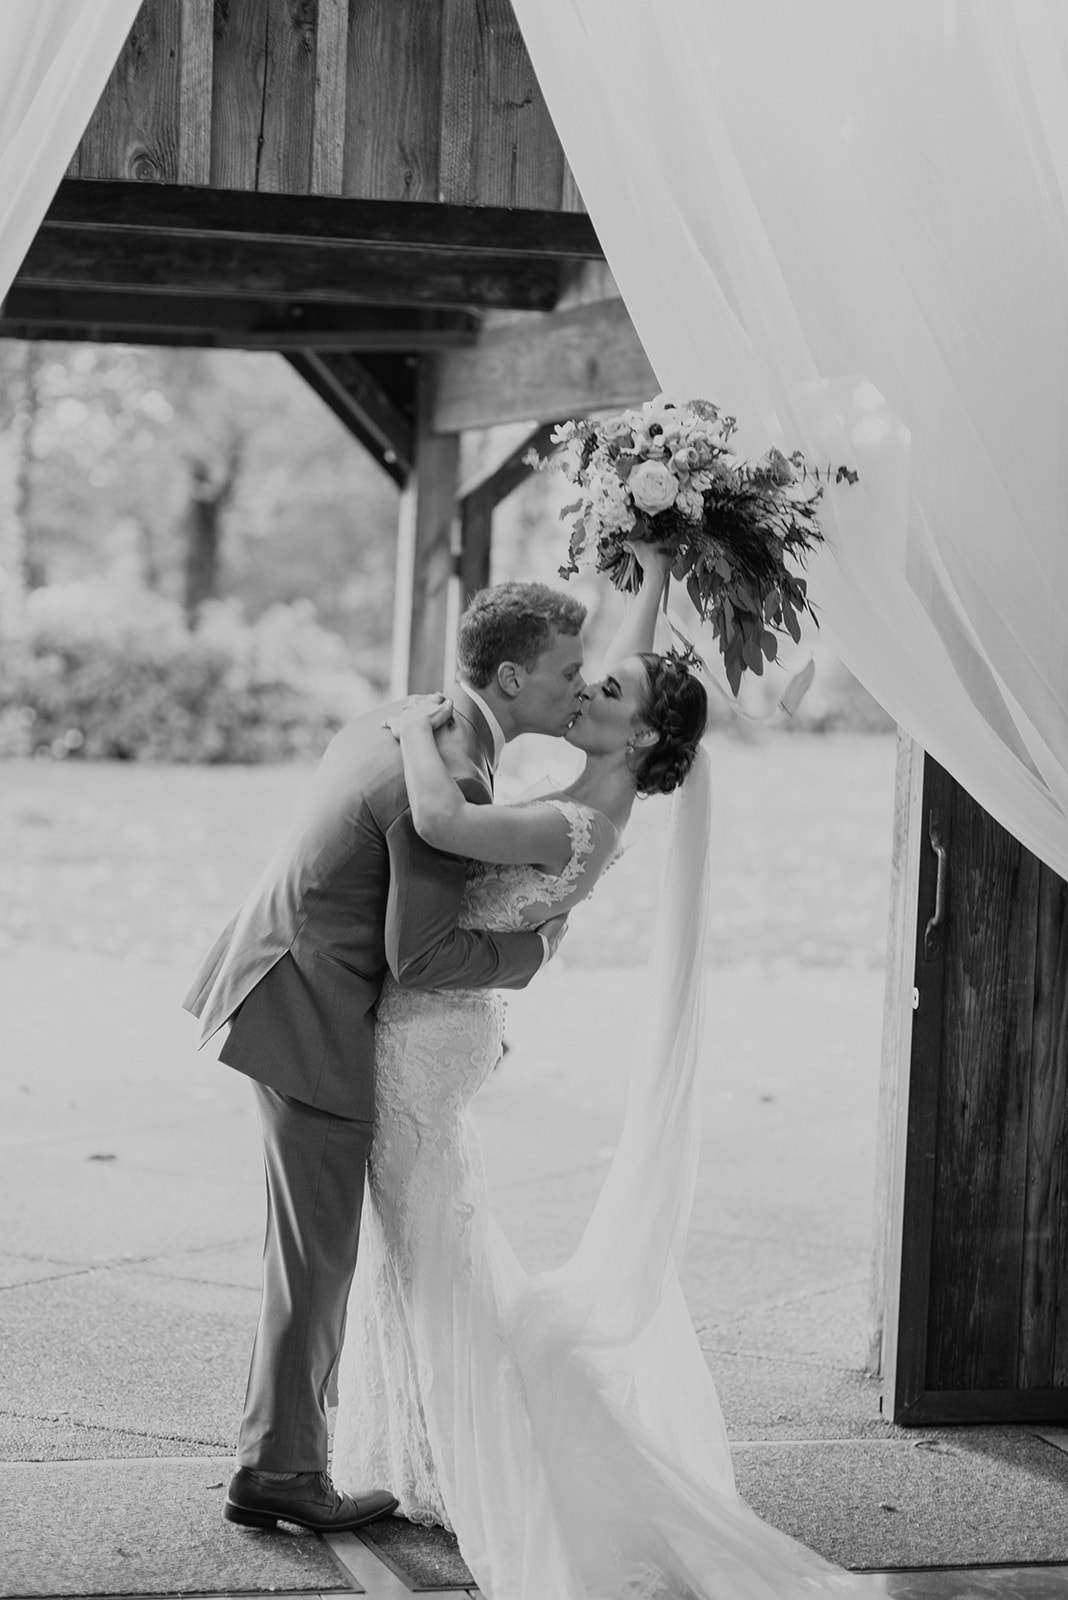 A black and white image of the bouquet being held high while couple kisses